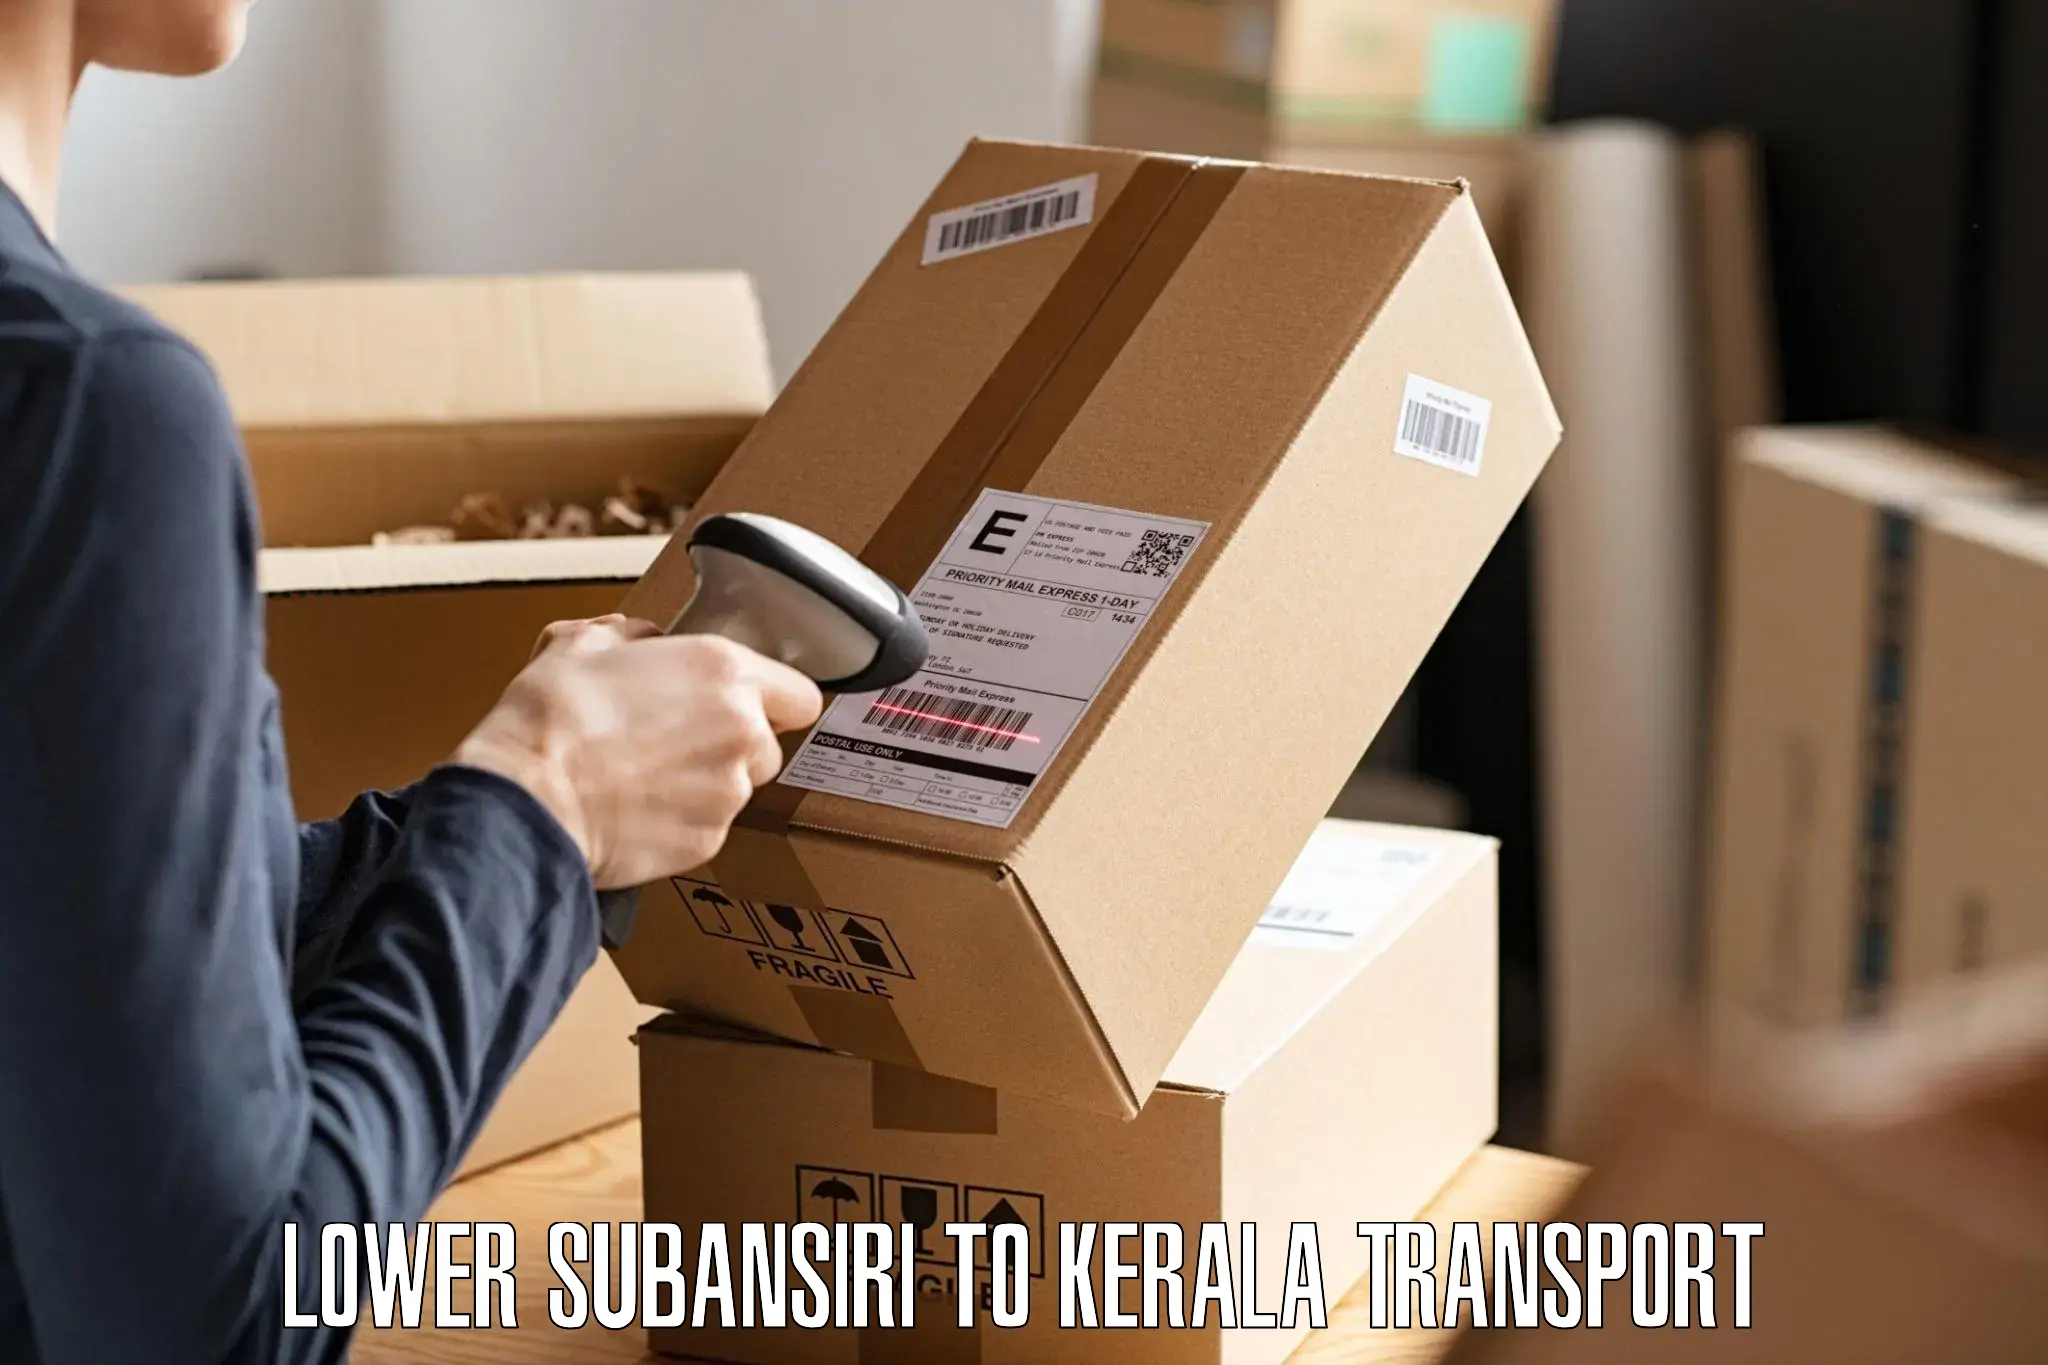 Parcel transport services Lower Subansiri to Angamaly